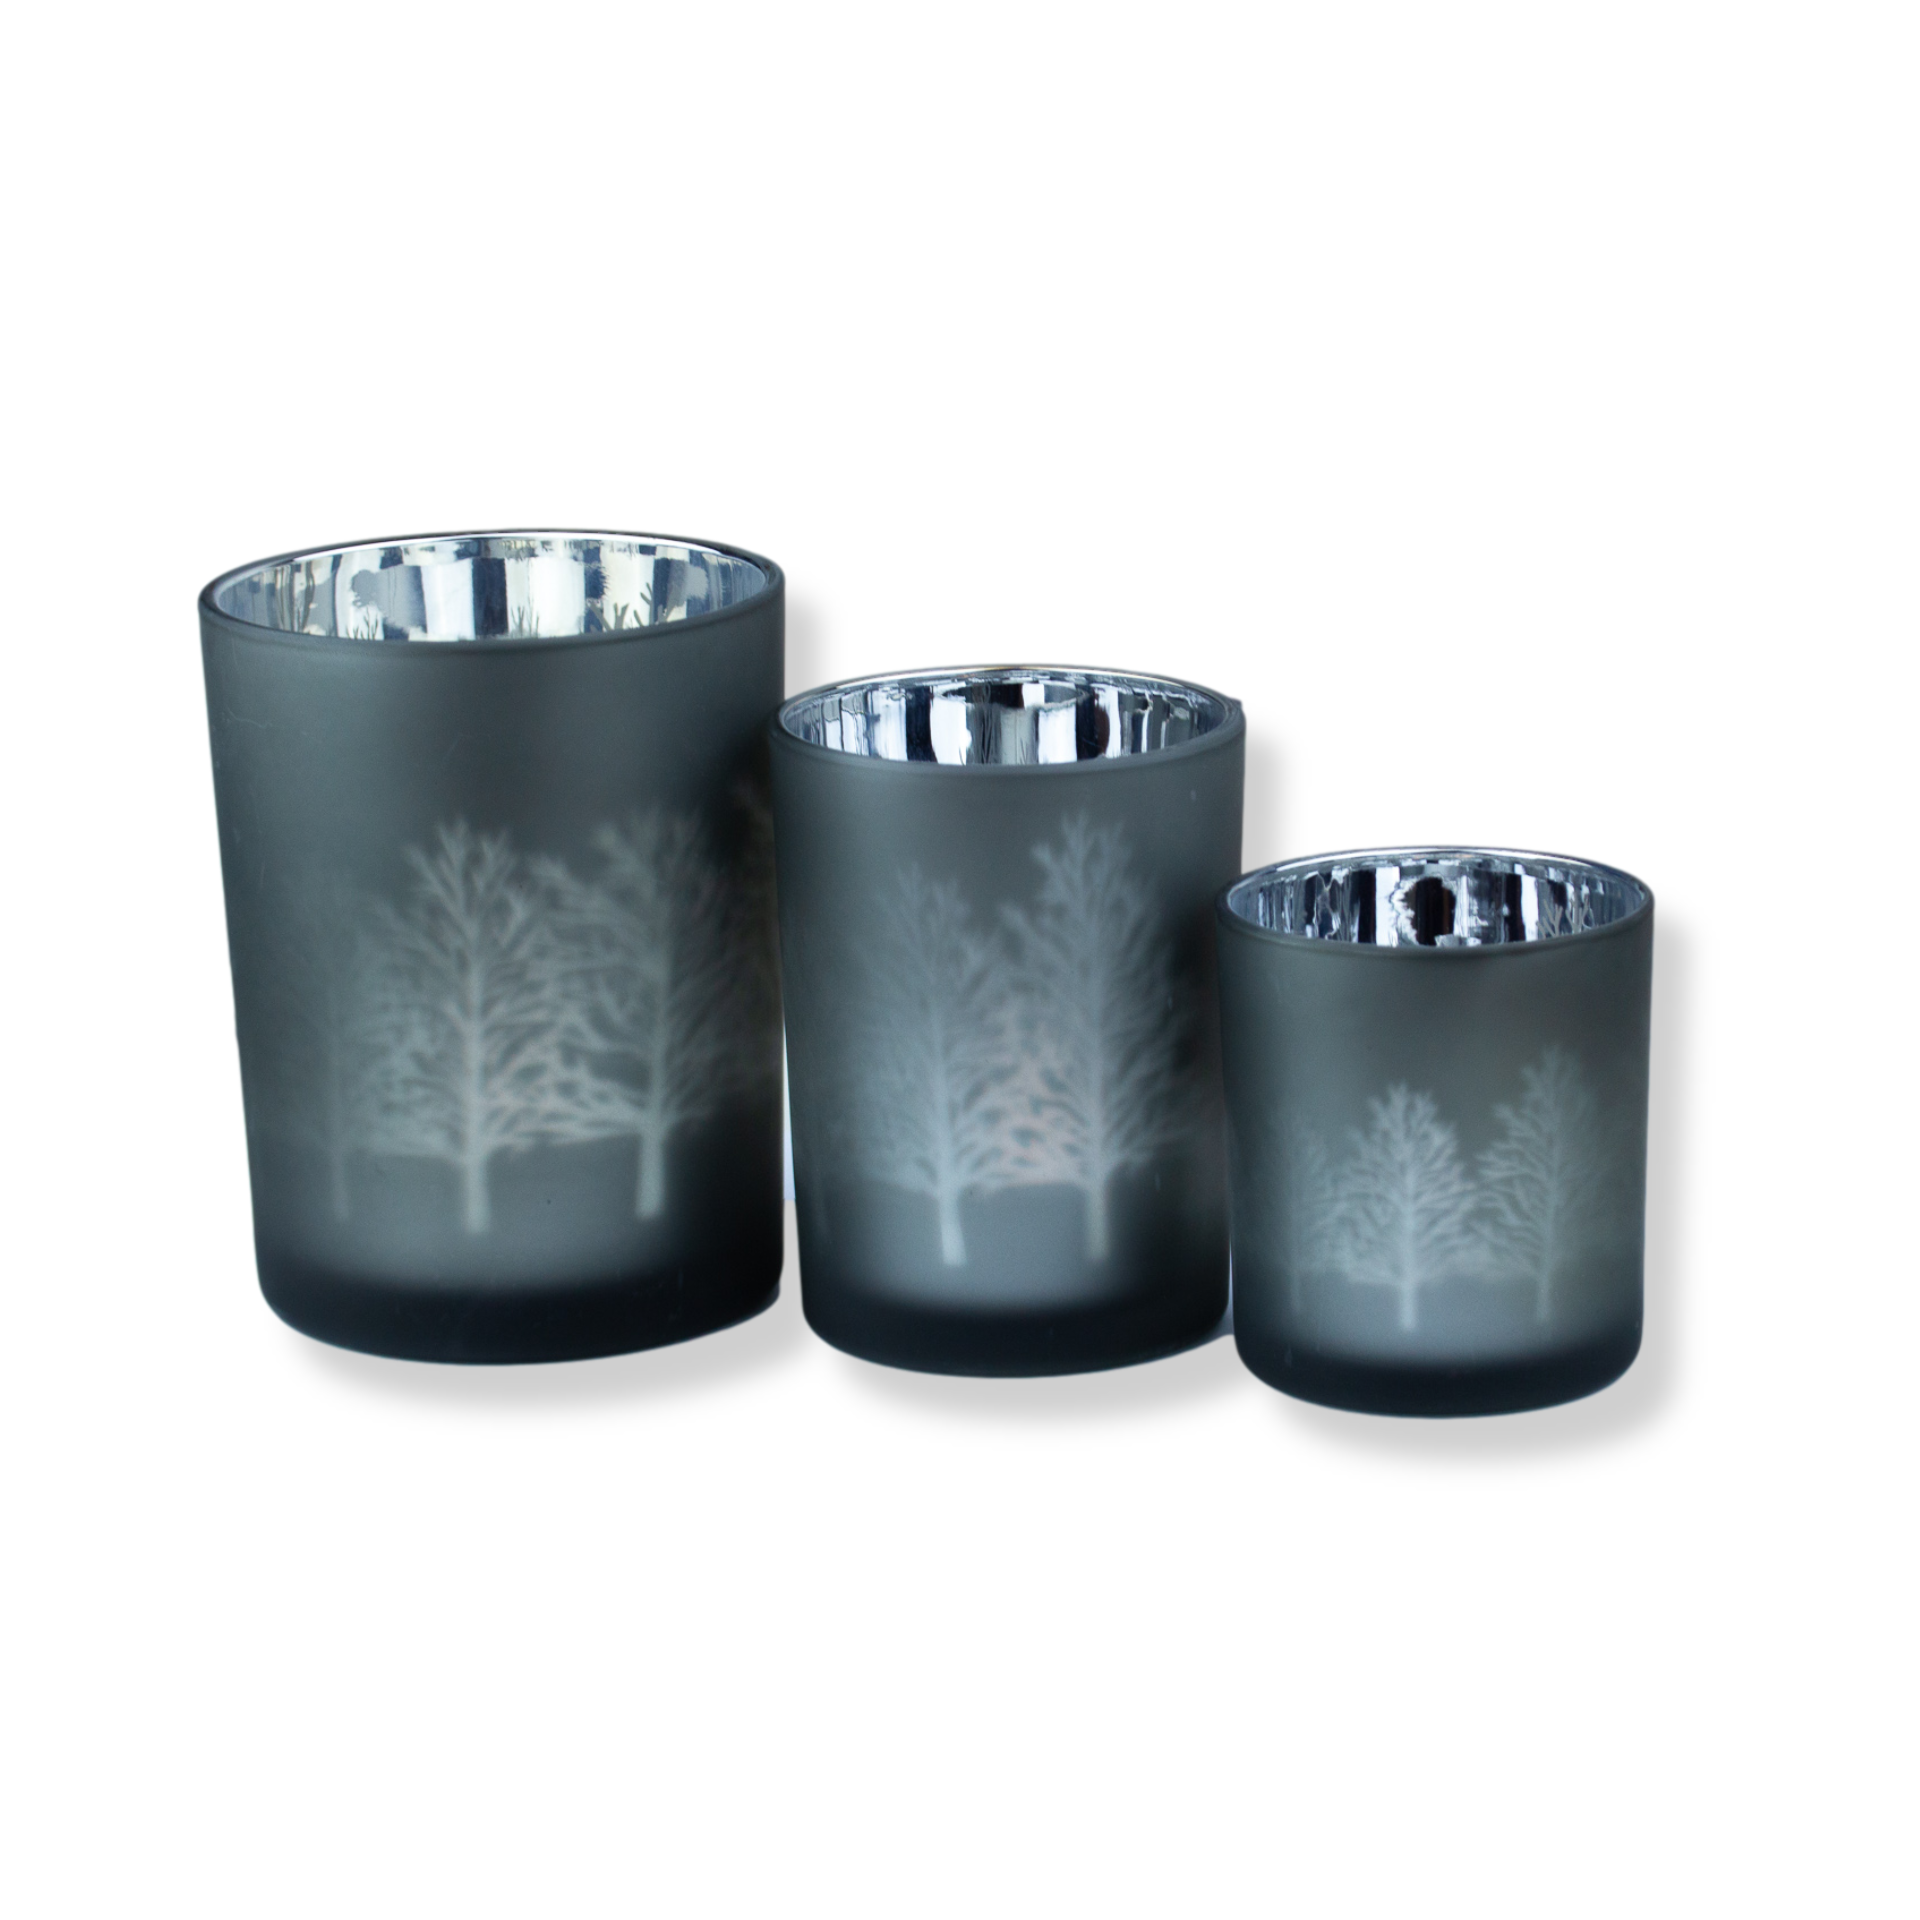 Grey Tree Silhouette Candle Holder - Set of 3